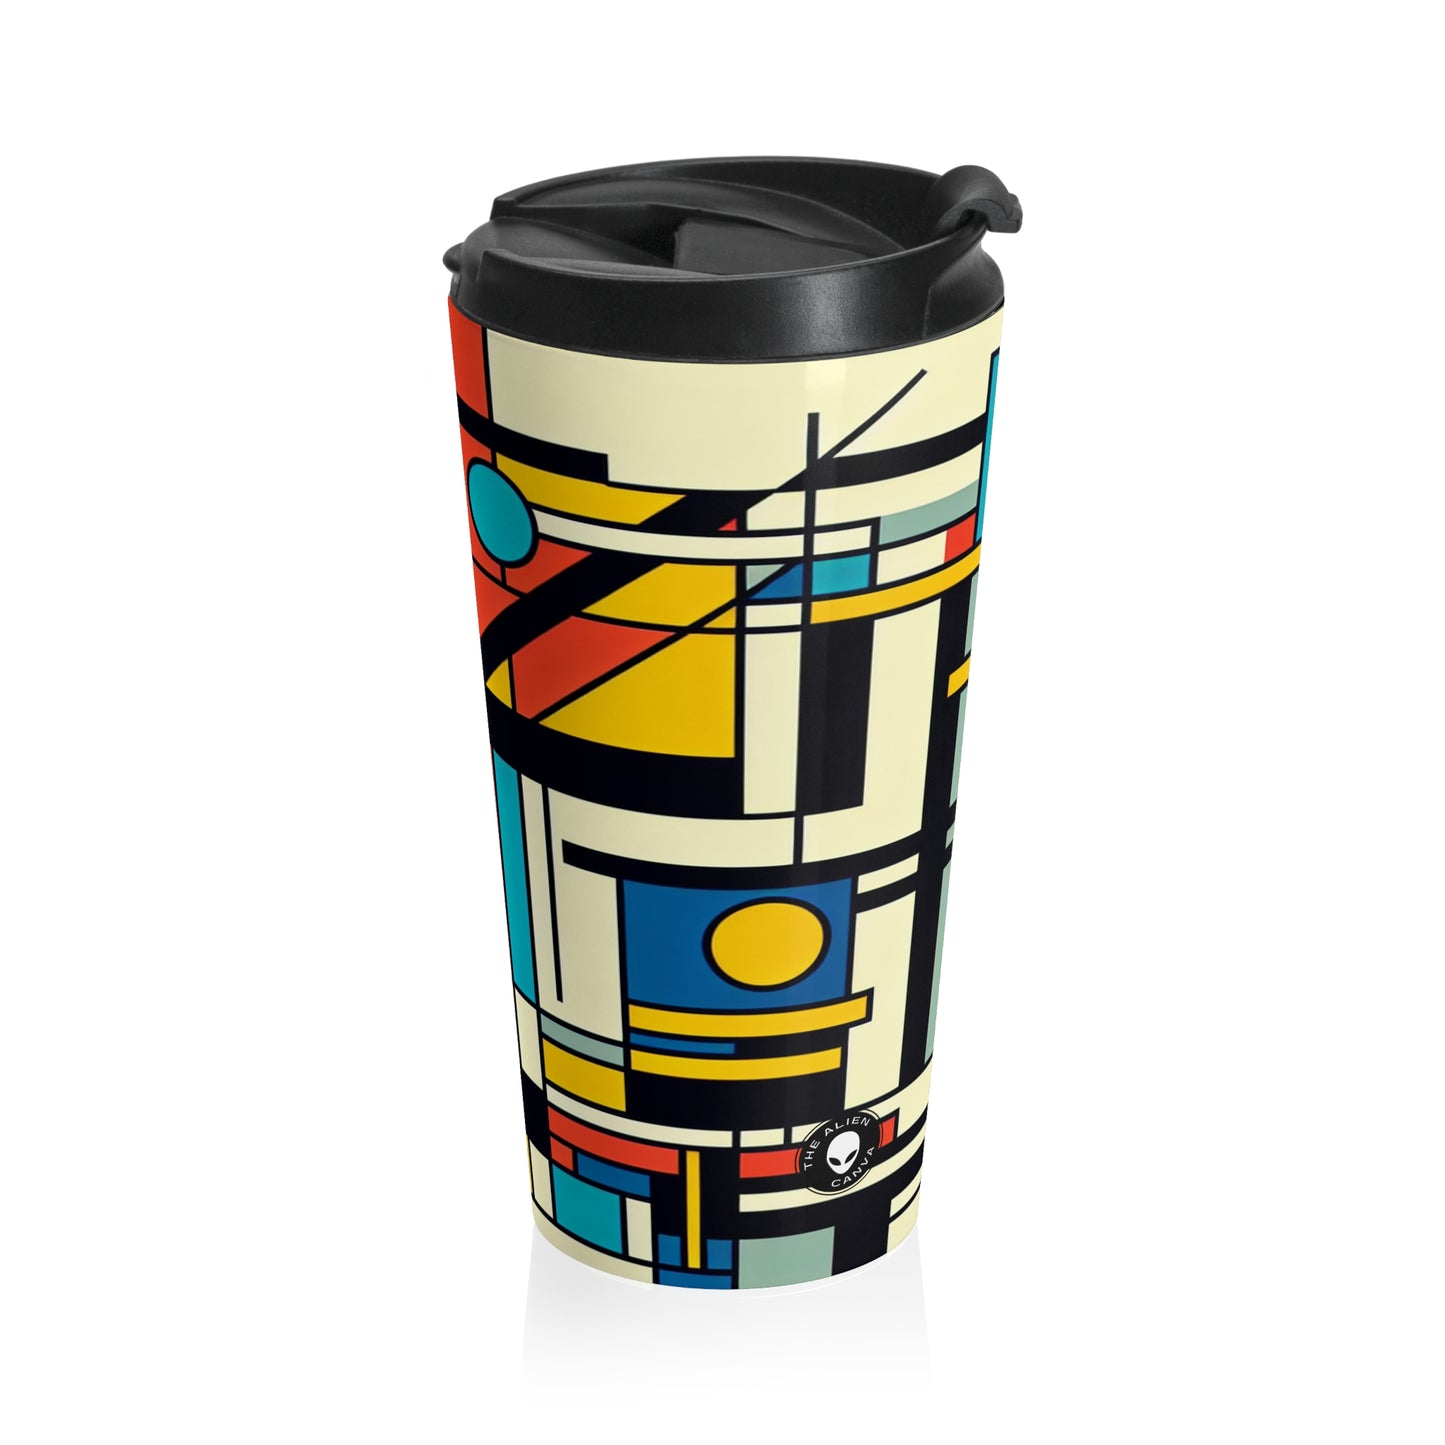 "Harmonious Balance: Neoplastic Exploration in Black, White, and Primary Colors" - The Alien Stainless Steel Travel Mug Neoplasticism